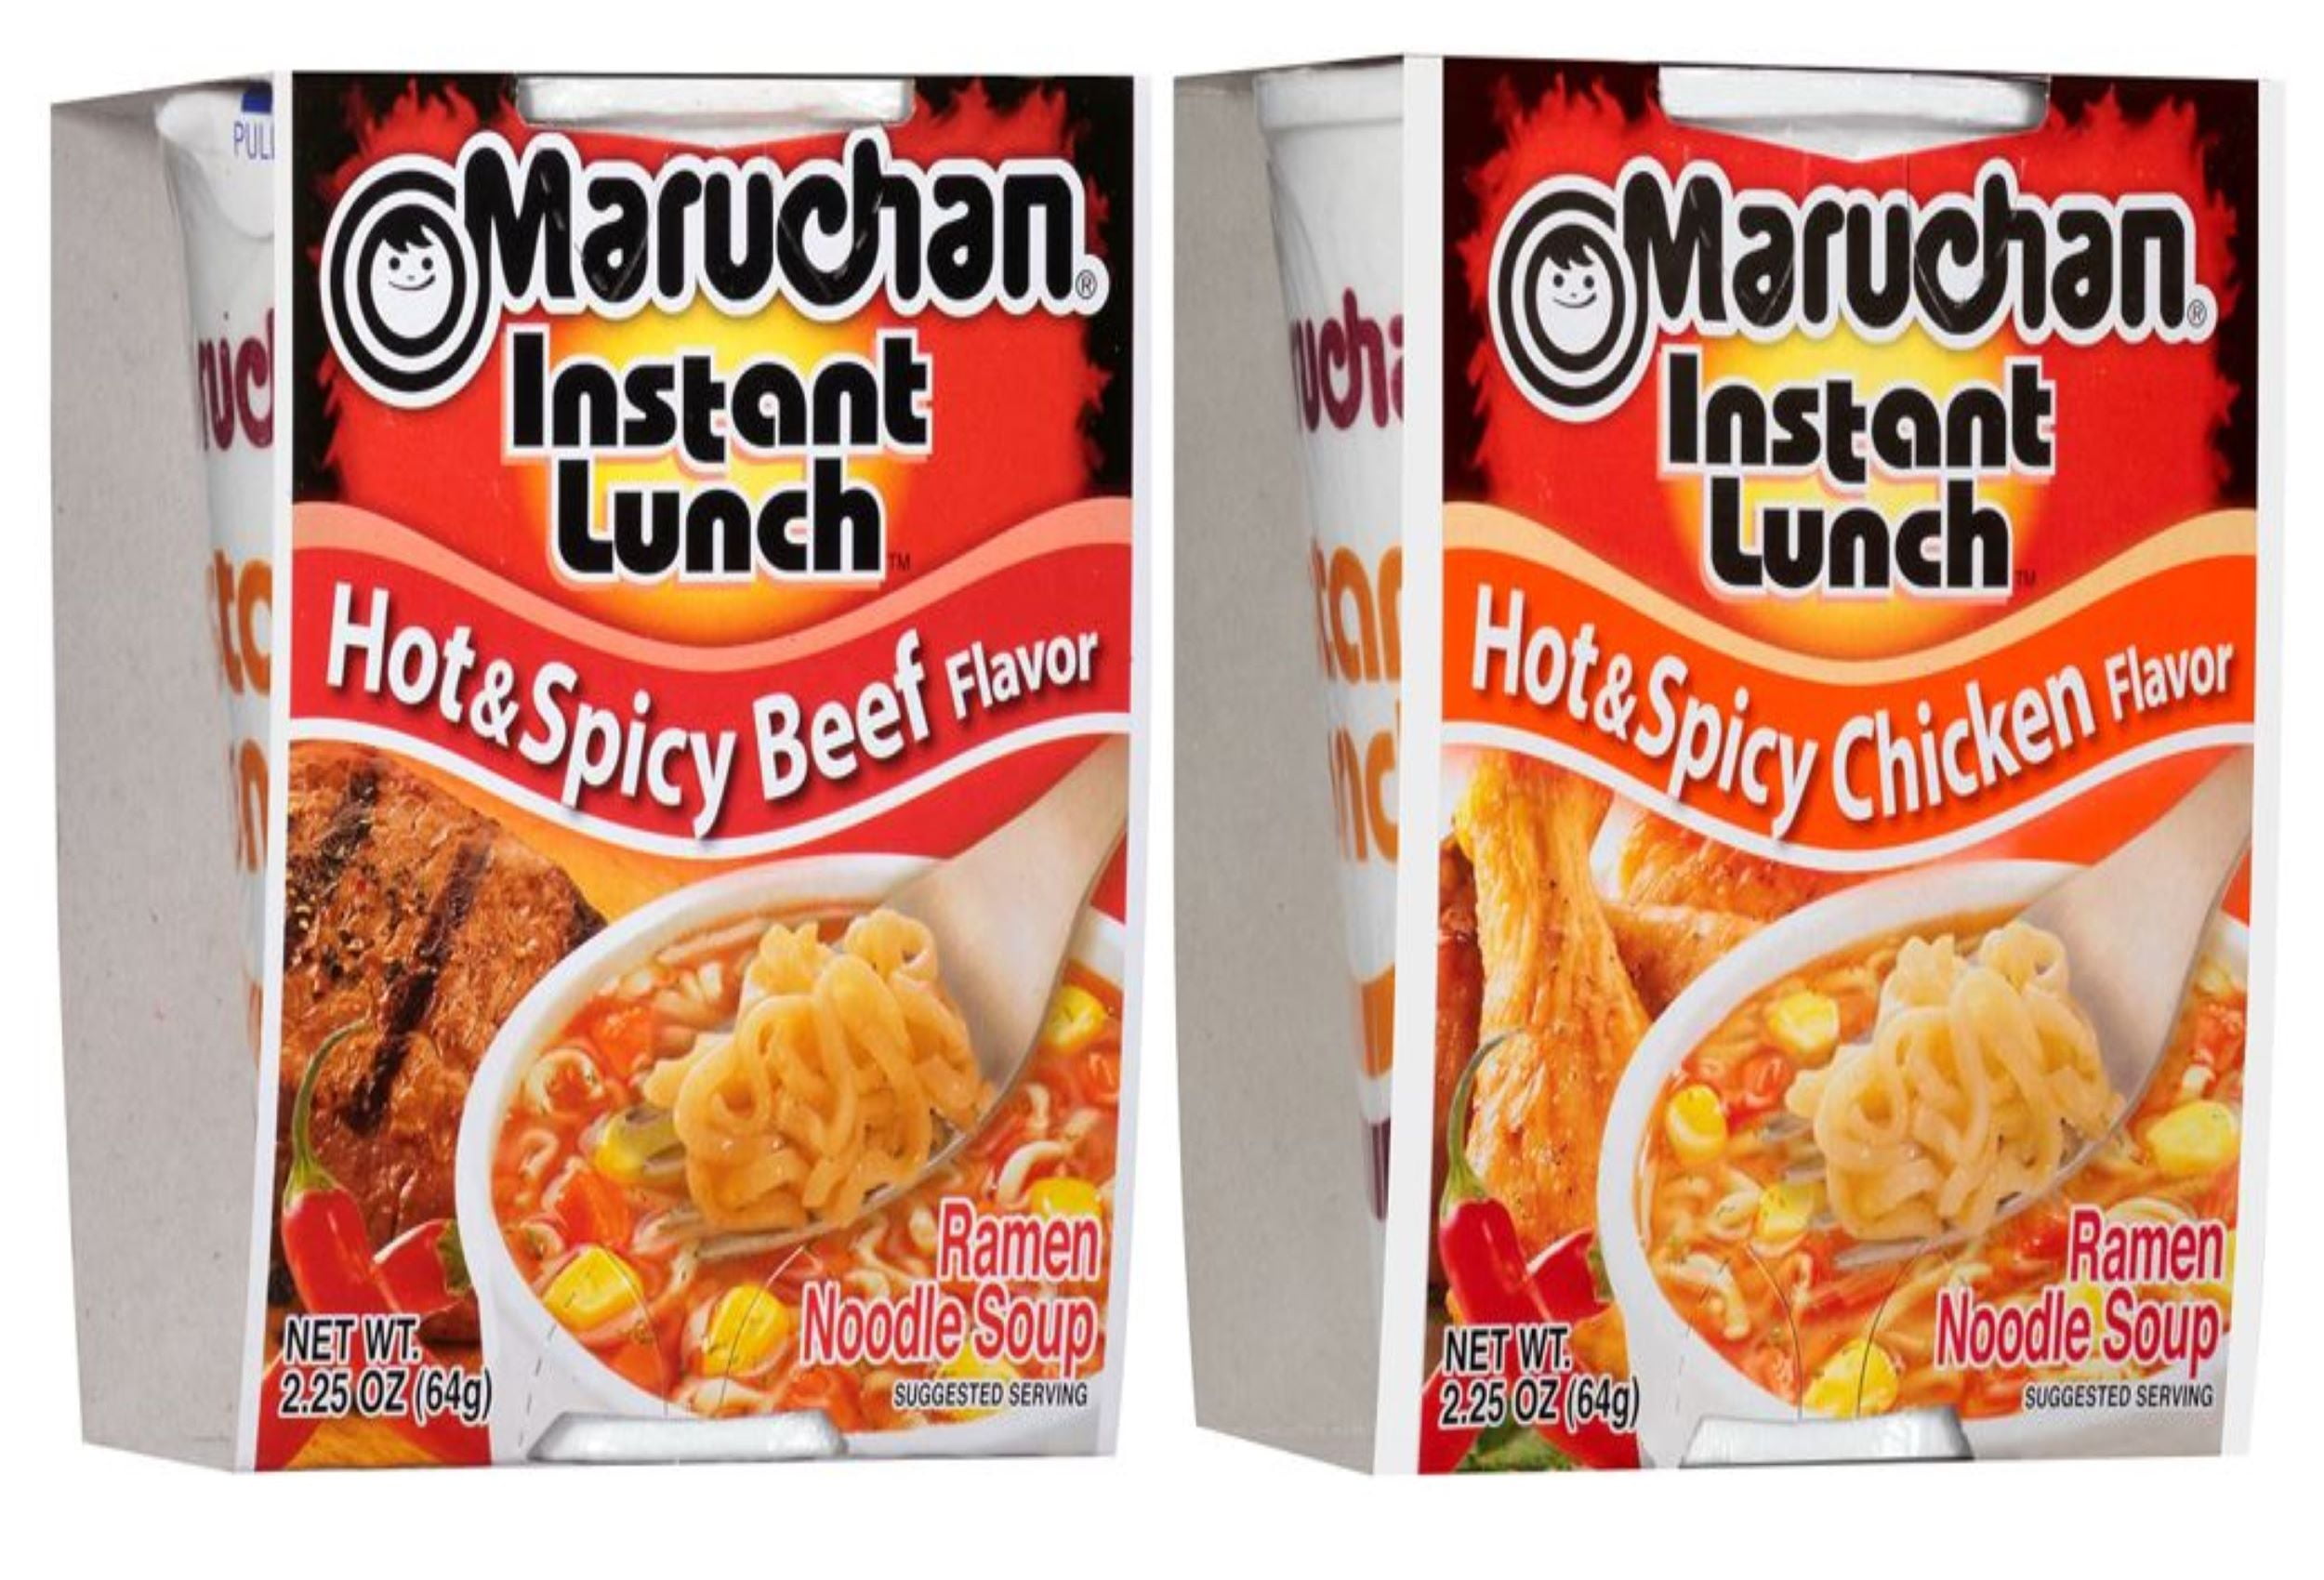  Maruchan Ramen cup Instant Soup Noodles Mix Variety 3 Flavor  Packs 12 Count - 4 Cheddar Cheese, 4 Chili Piquin & Shrimp, 4 Hot & Spicy  Beef, Pack Lunch/Dinner Variety : Grocery & Gourmet Food